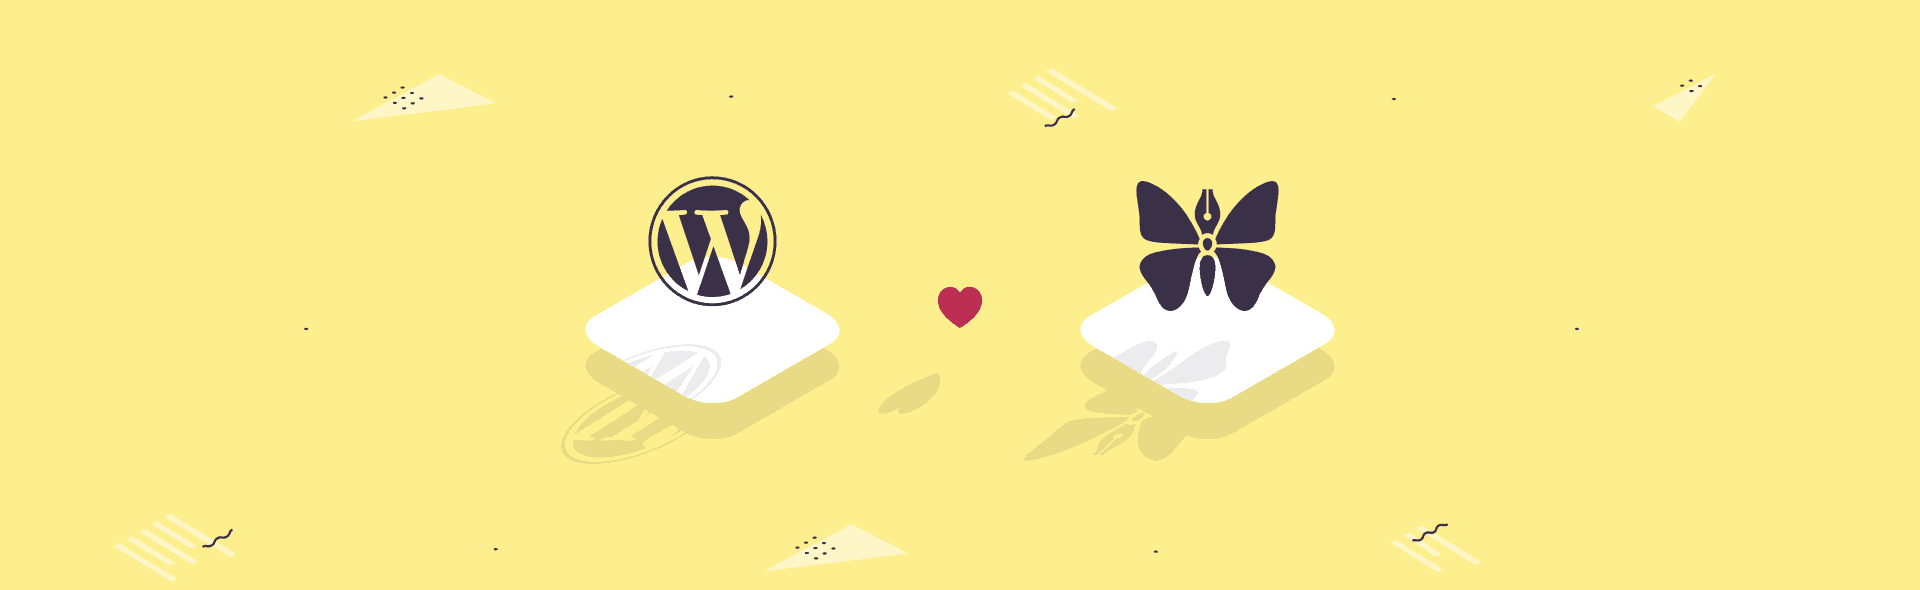 Wordpress and Butterfly logos